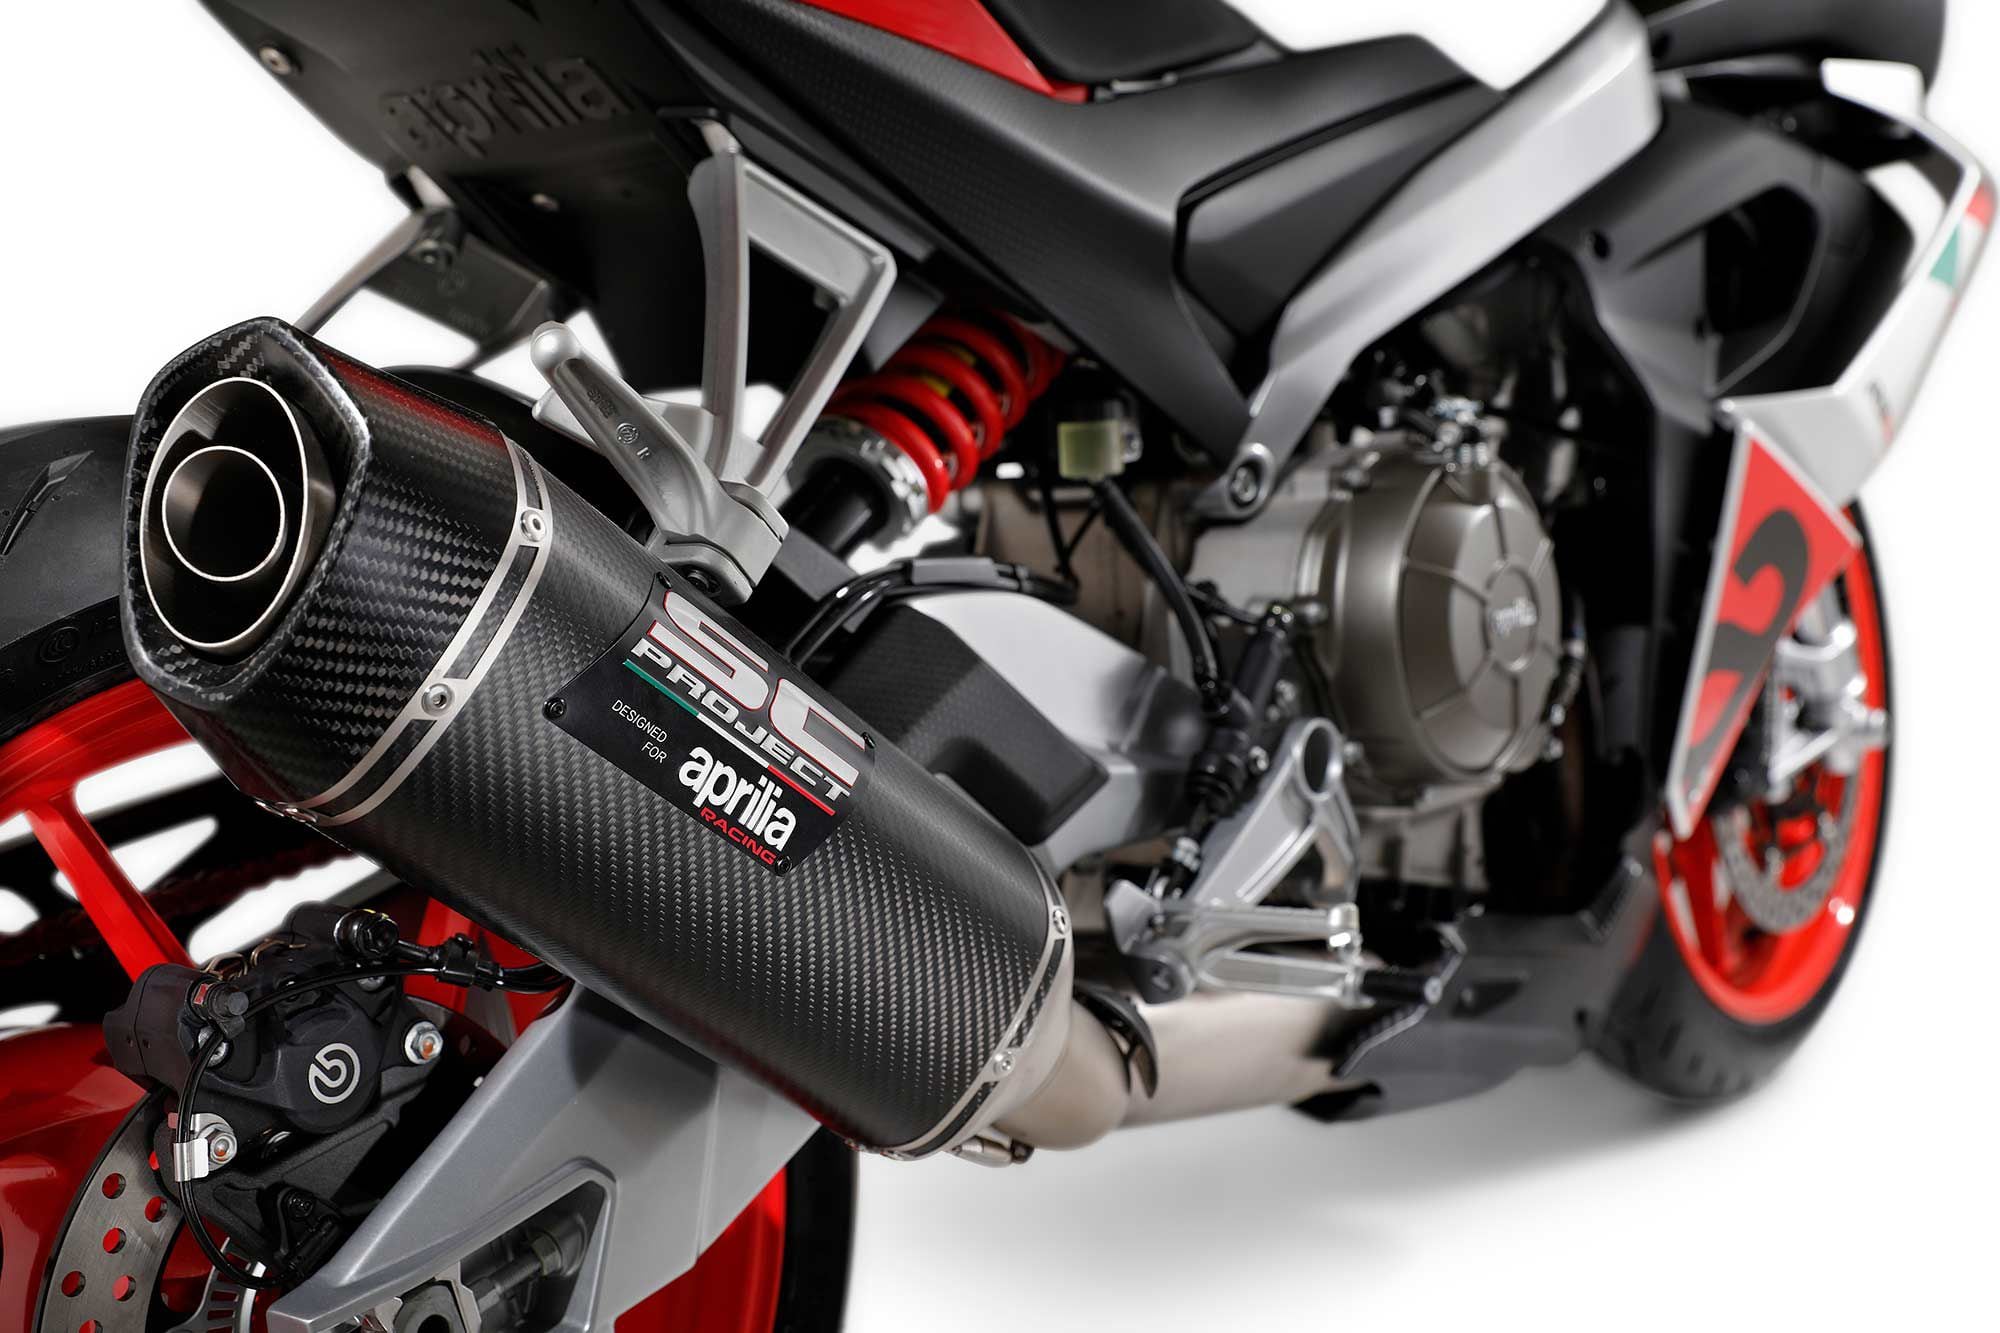 An SC-Project exhaust system also contributes to the RS 660’s reduction in weight.